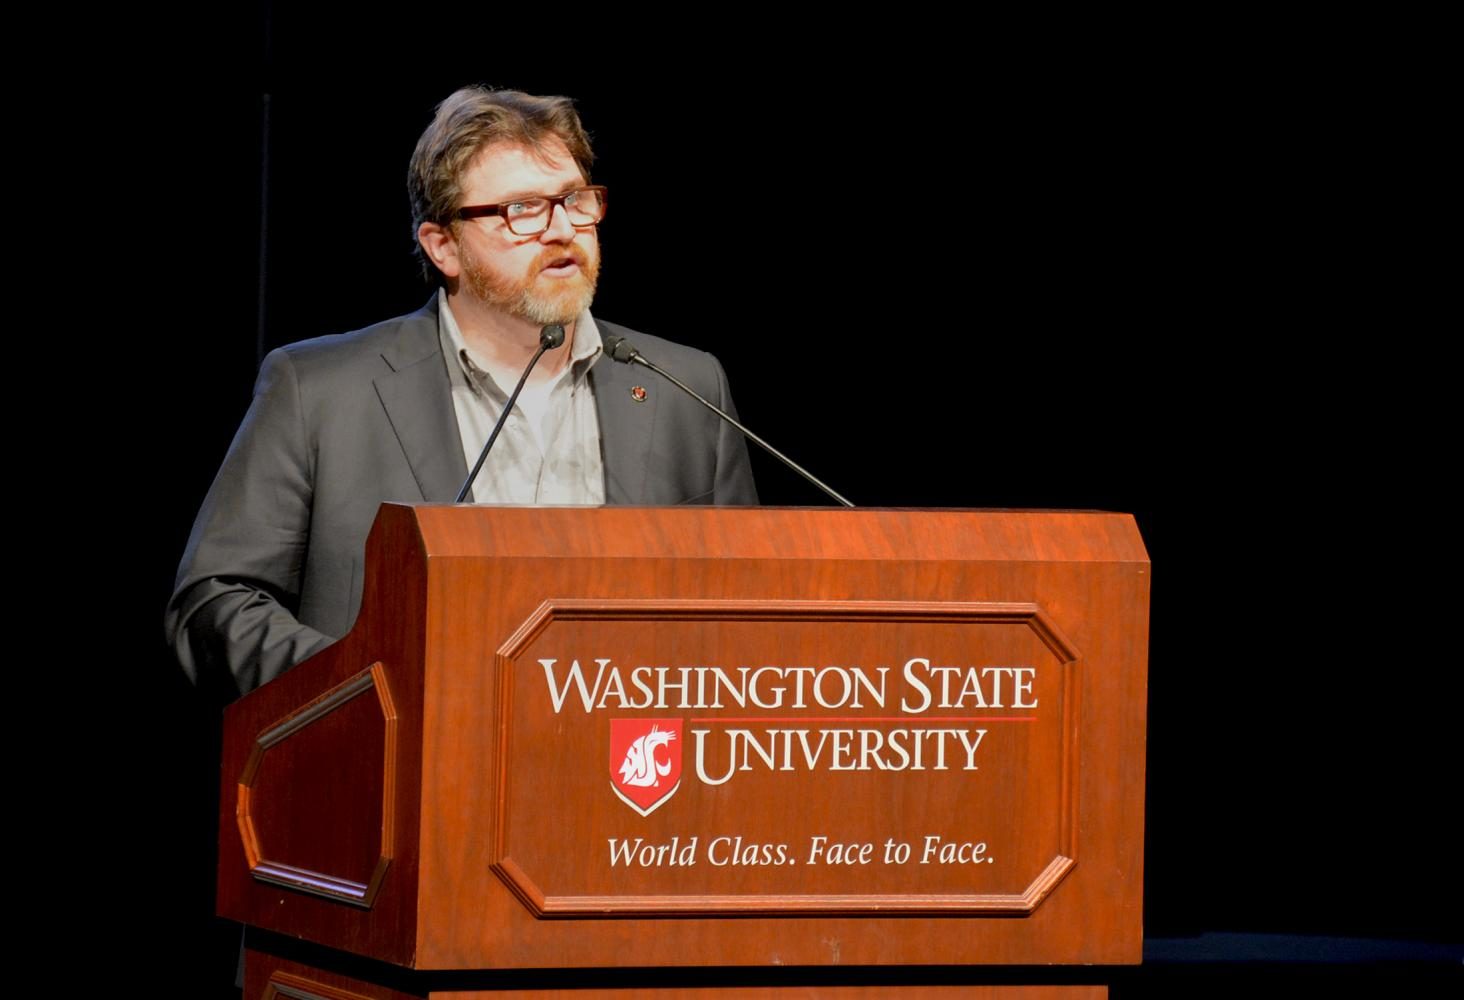 Ernest Cline, author of the scientific novel “Ready Player One,” speaks about his childhood, imagination and an upcoming movie directed by Steven Spielberg.